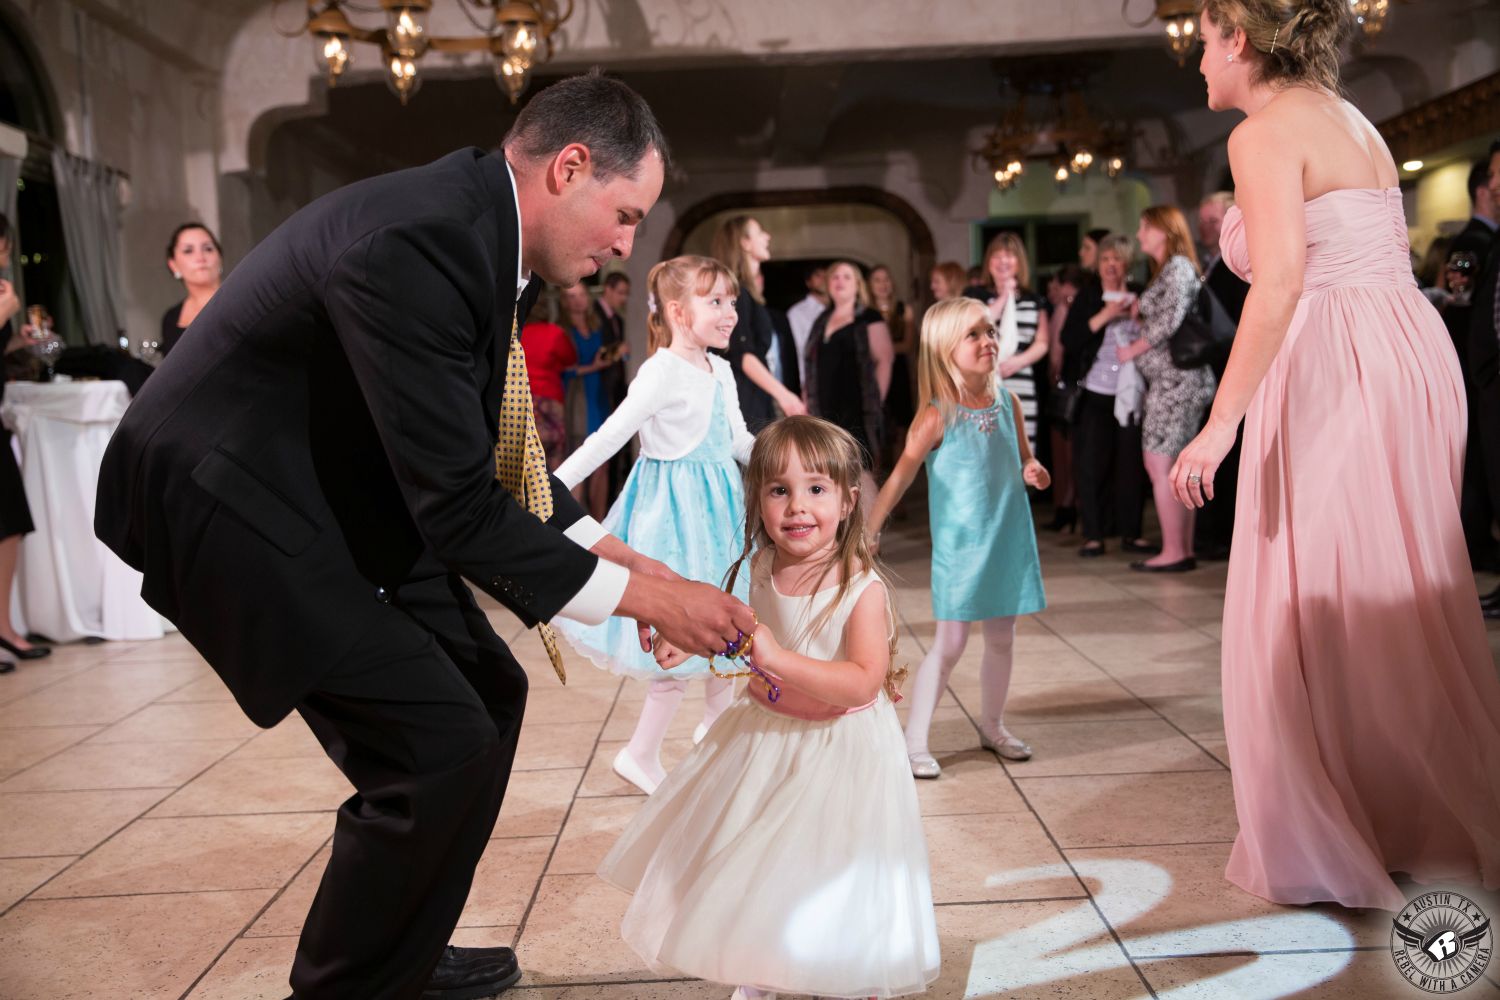 Picture of dad dancing with flower girl at wedding reception at Villa Antonia Austin wedding venue by Austin wedding photographer.